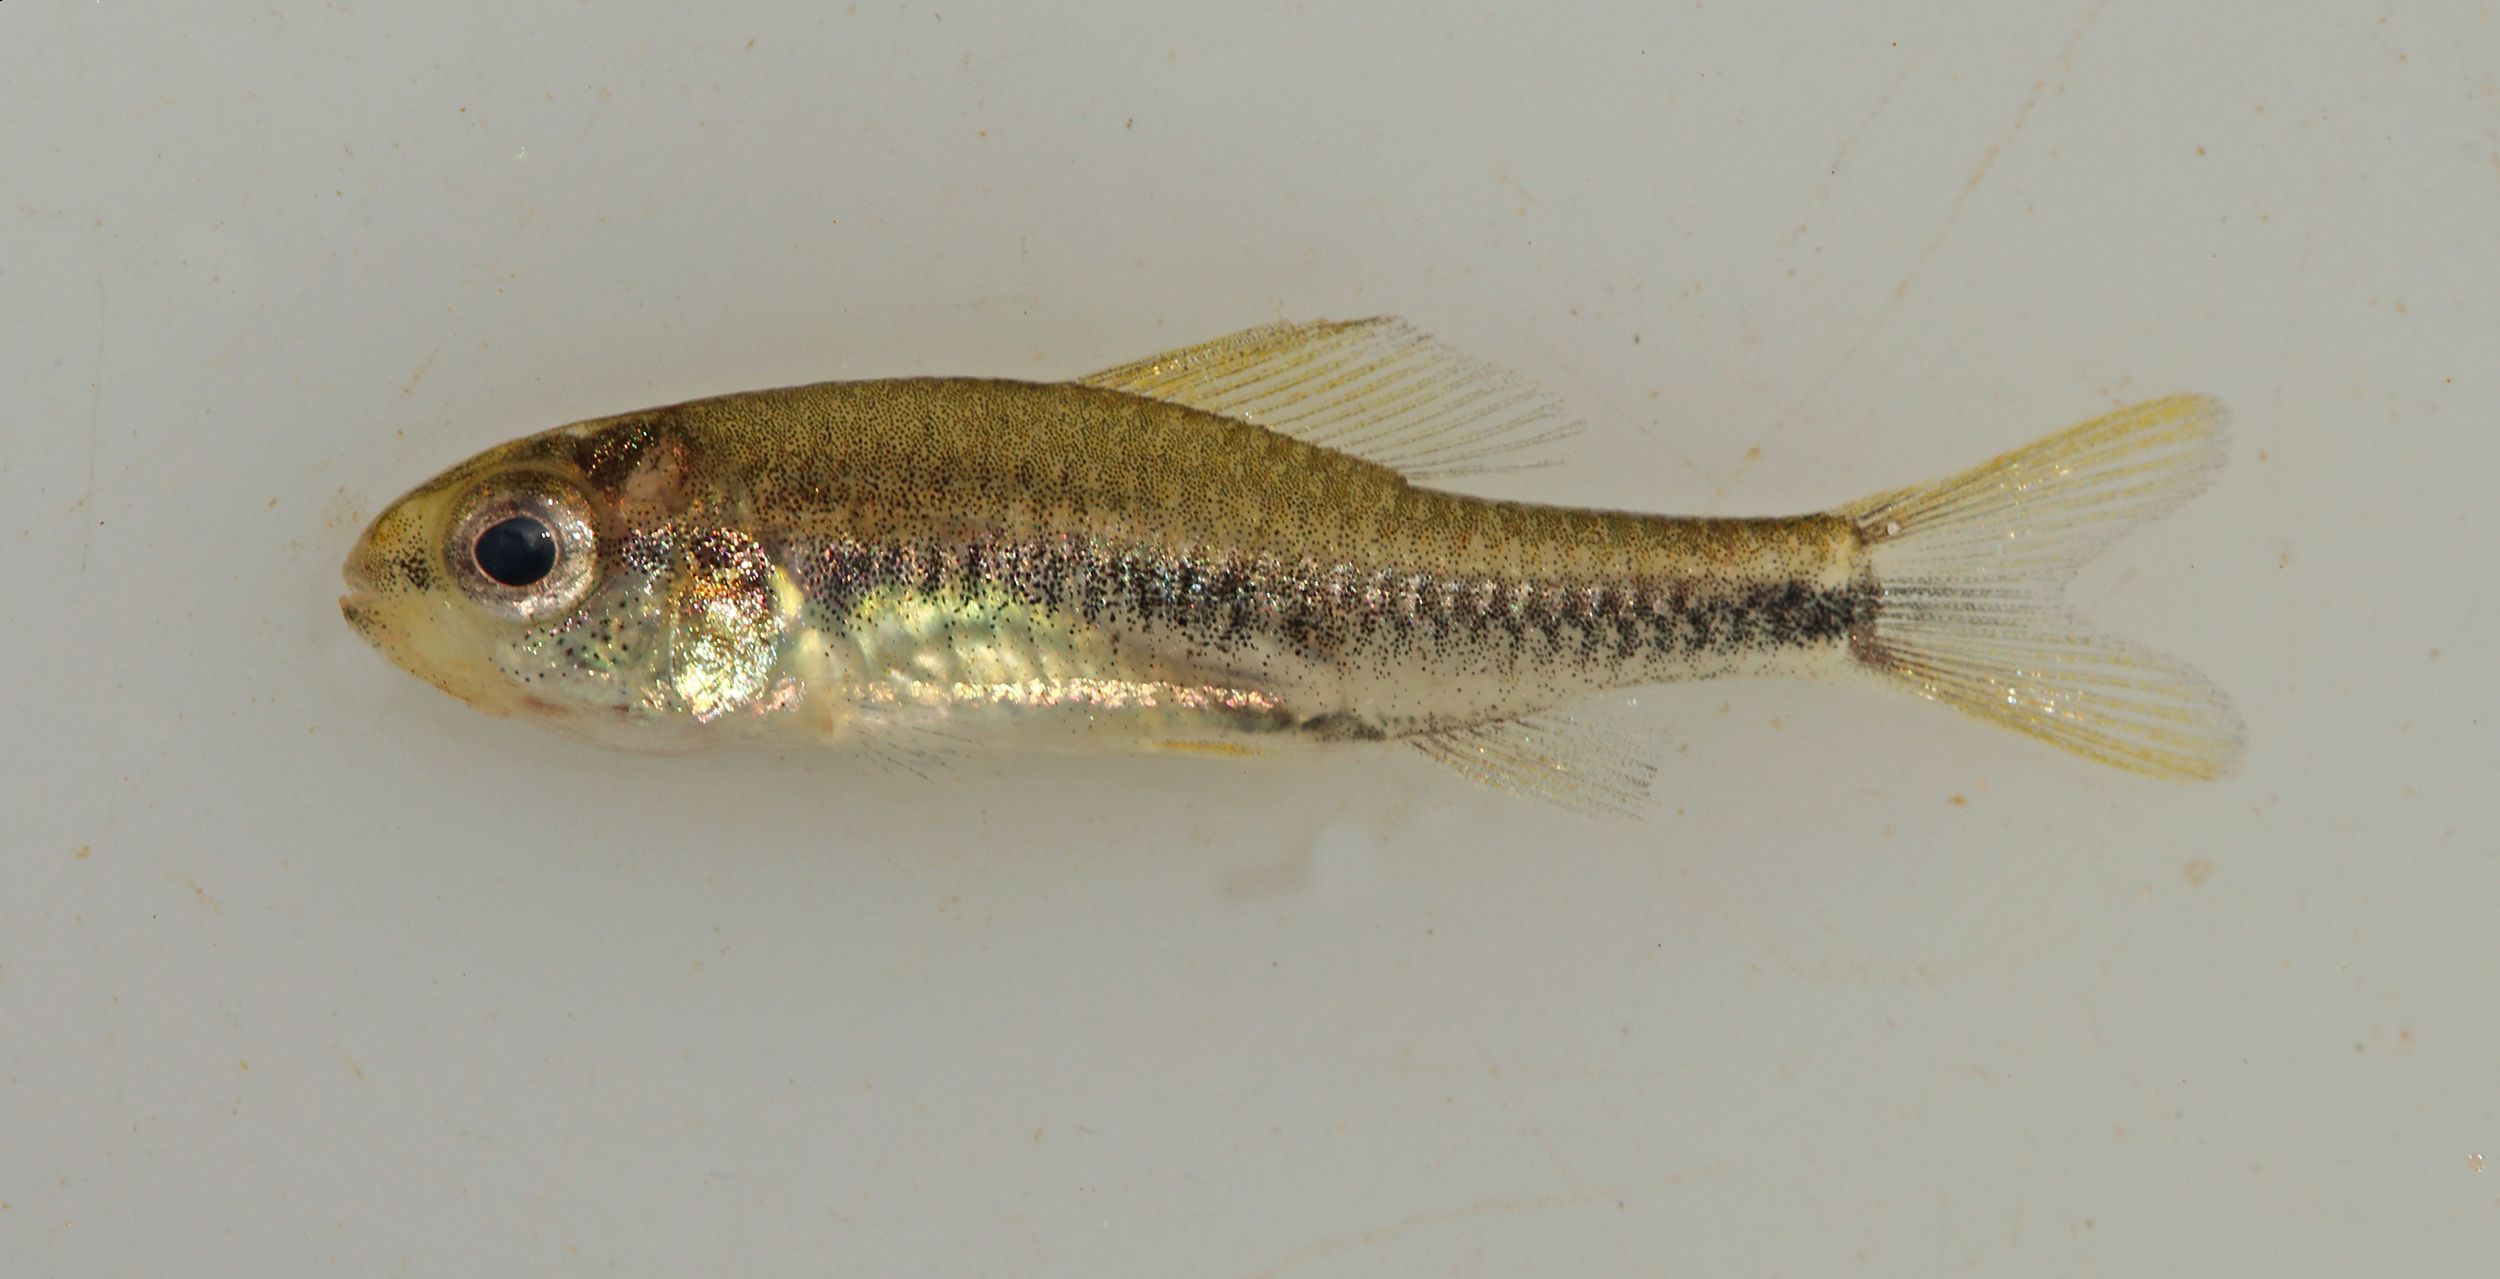 Tiny  fish spotted in a single stream could go extinct just